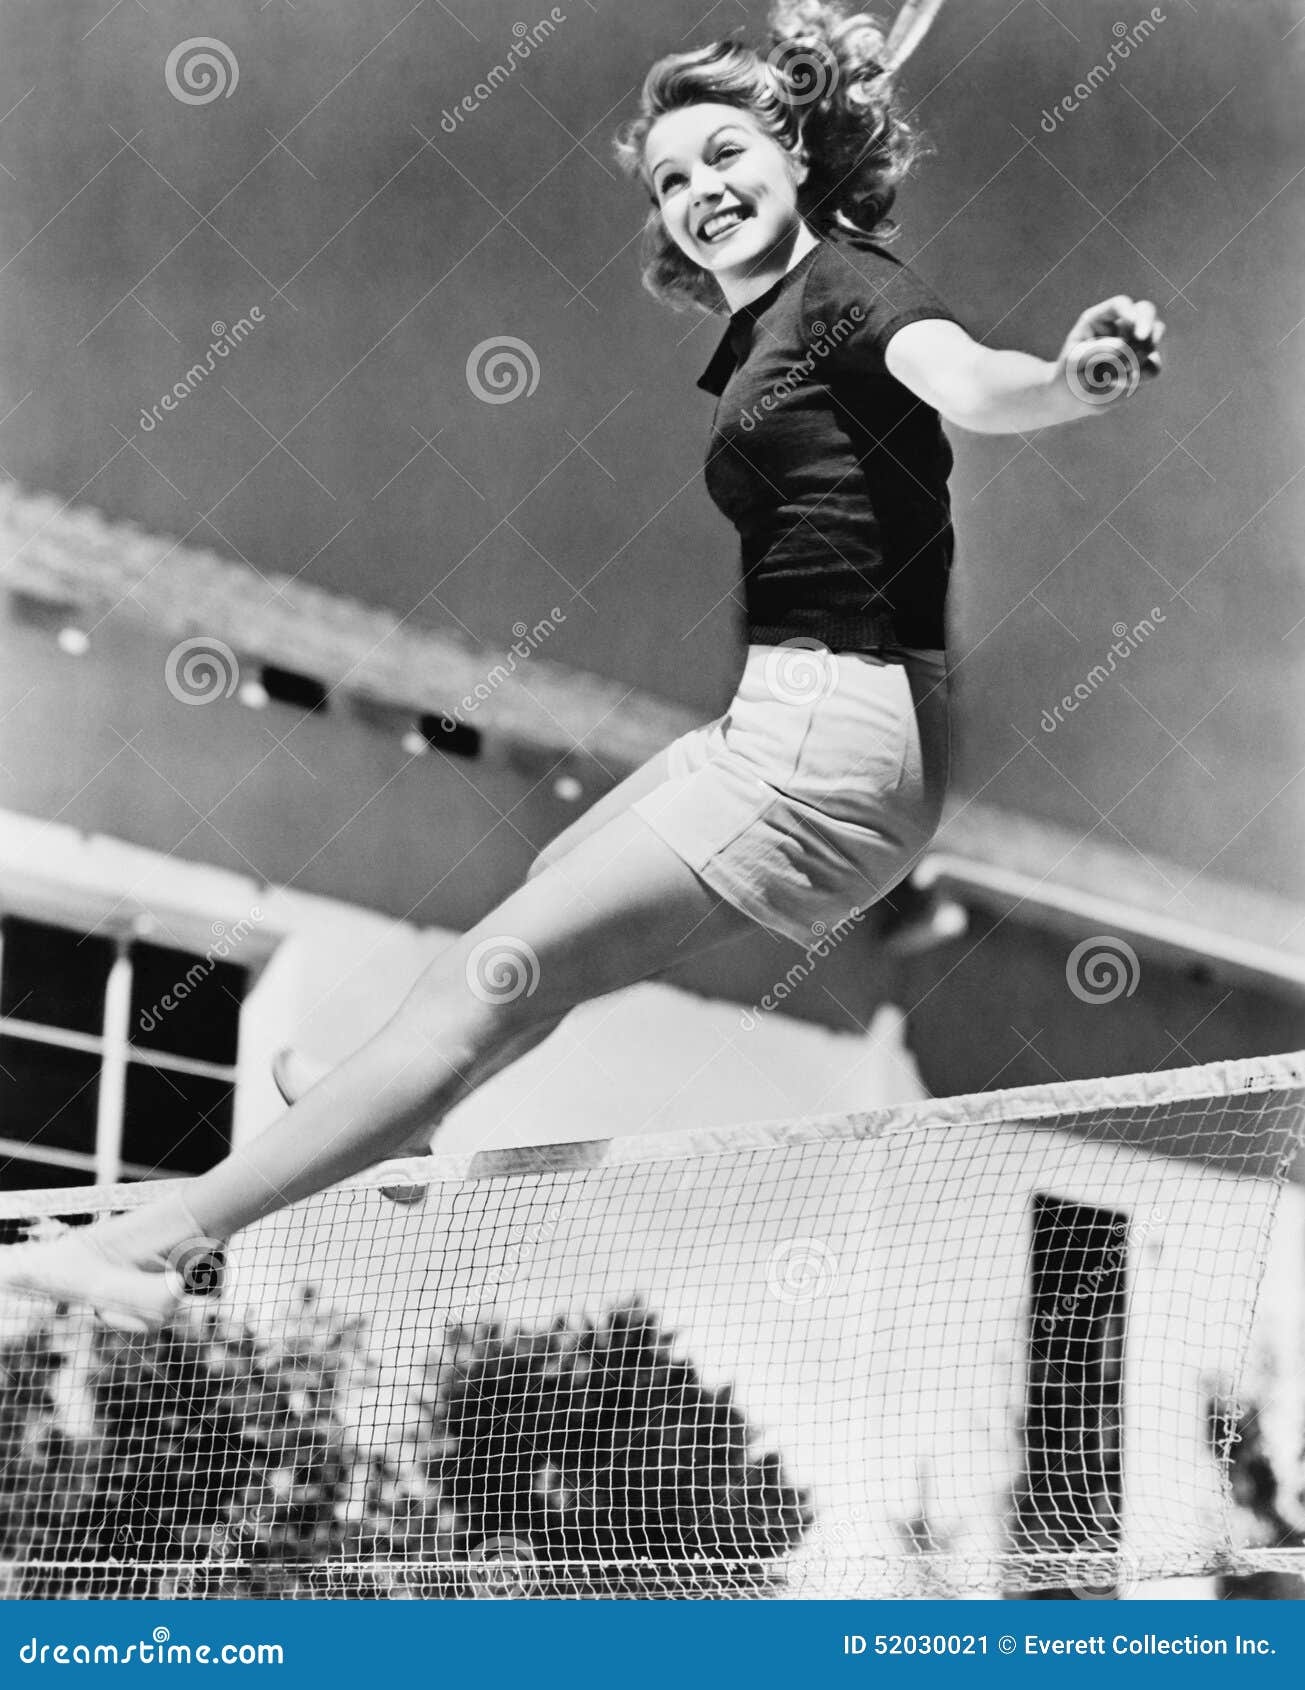 woman leaping over a tennis net